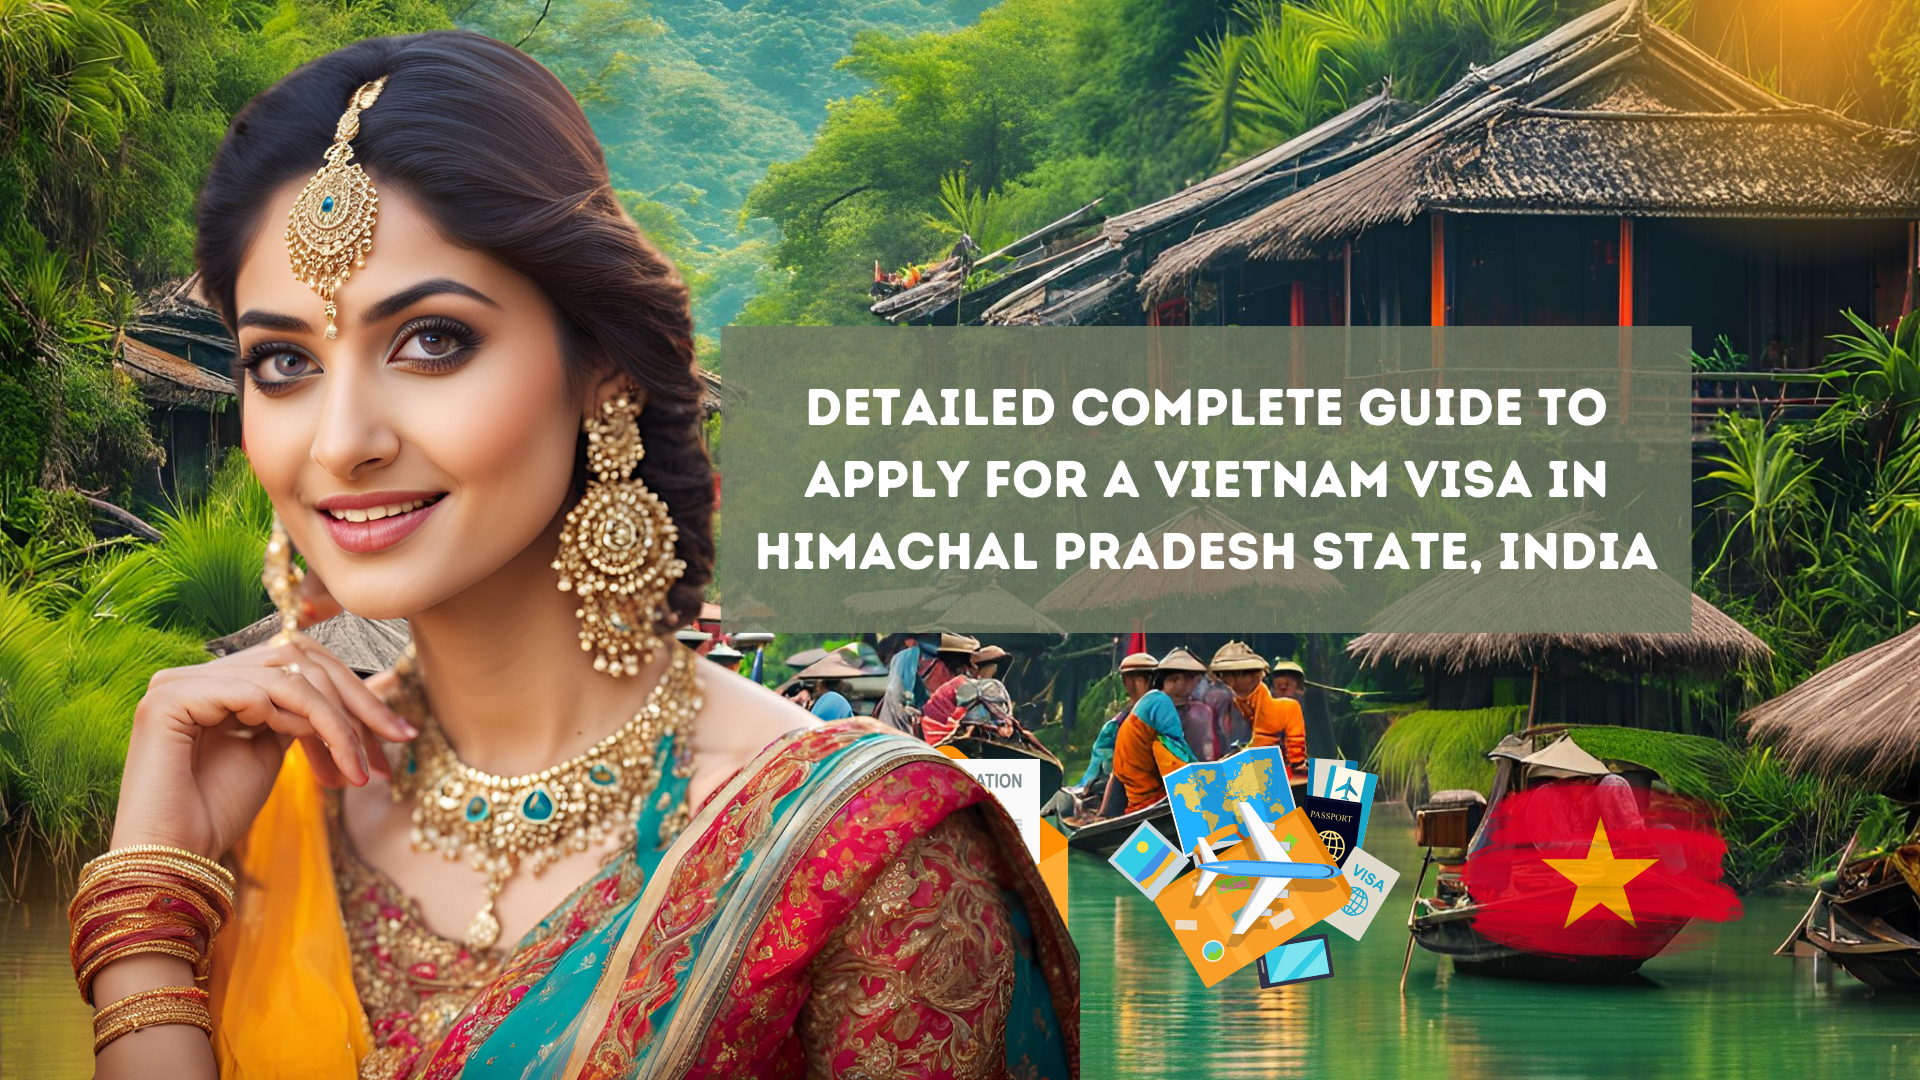 Detailed Complete Guide to Apply for a Vietnam Visa in Himachal Pradesh State, India